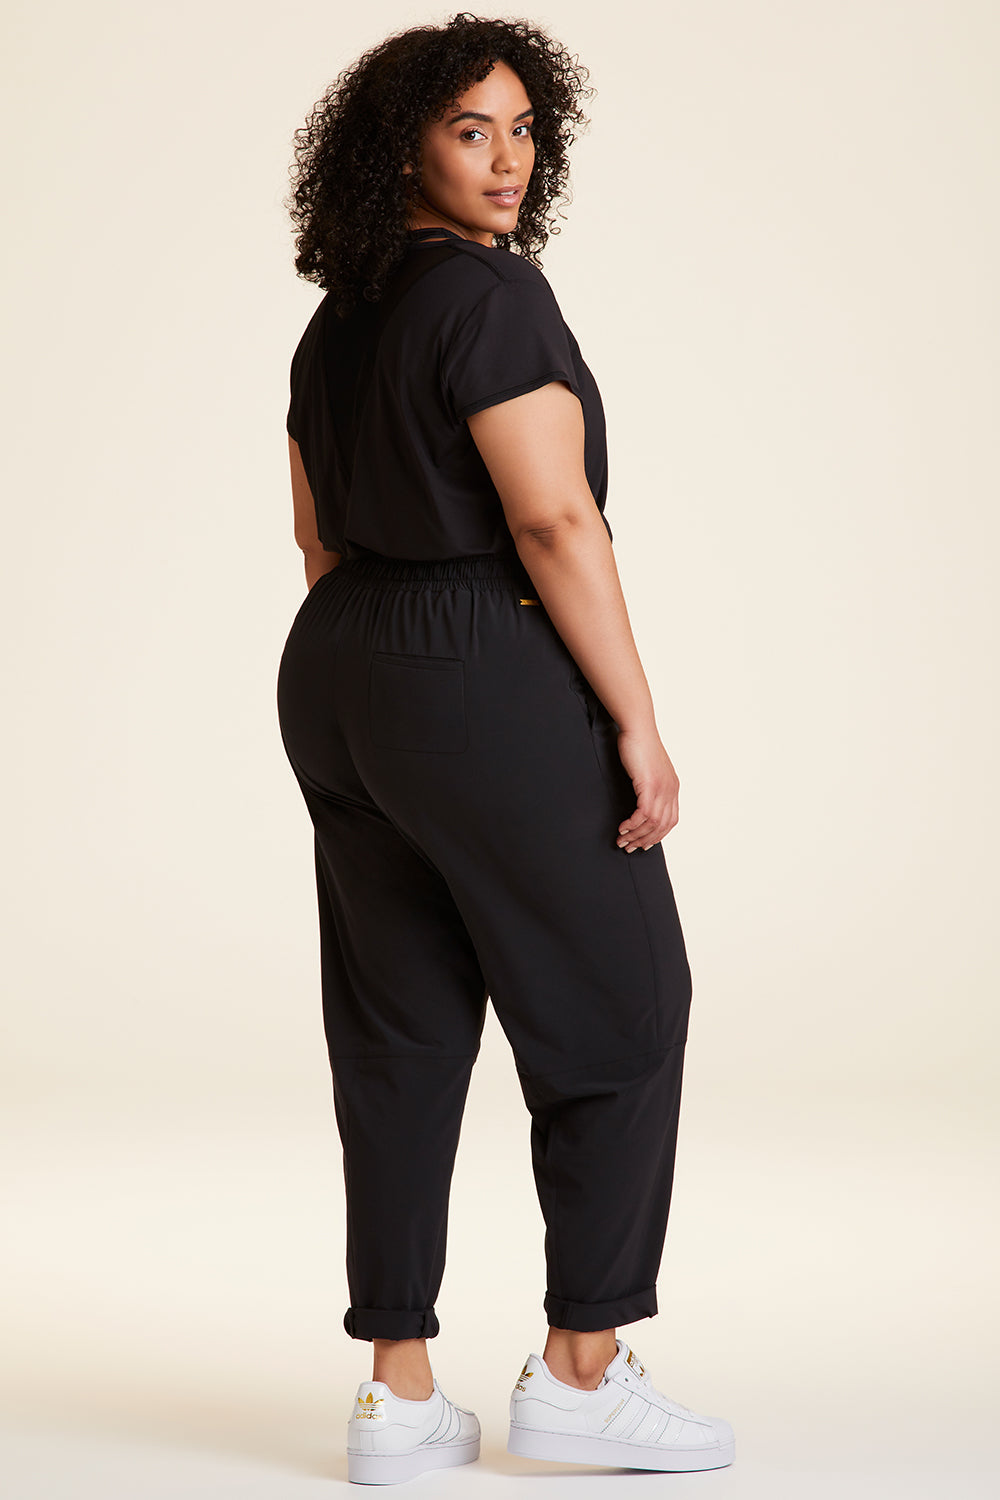 Buy Black Pants for Women Online at Low Prices on Snapdeal